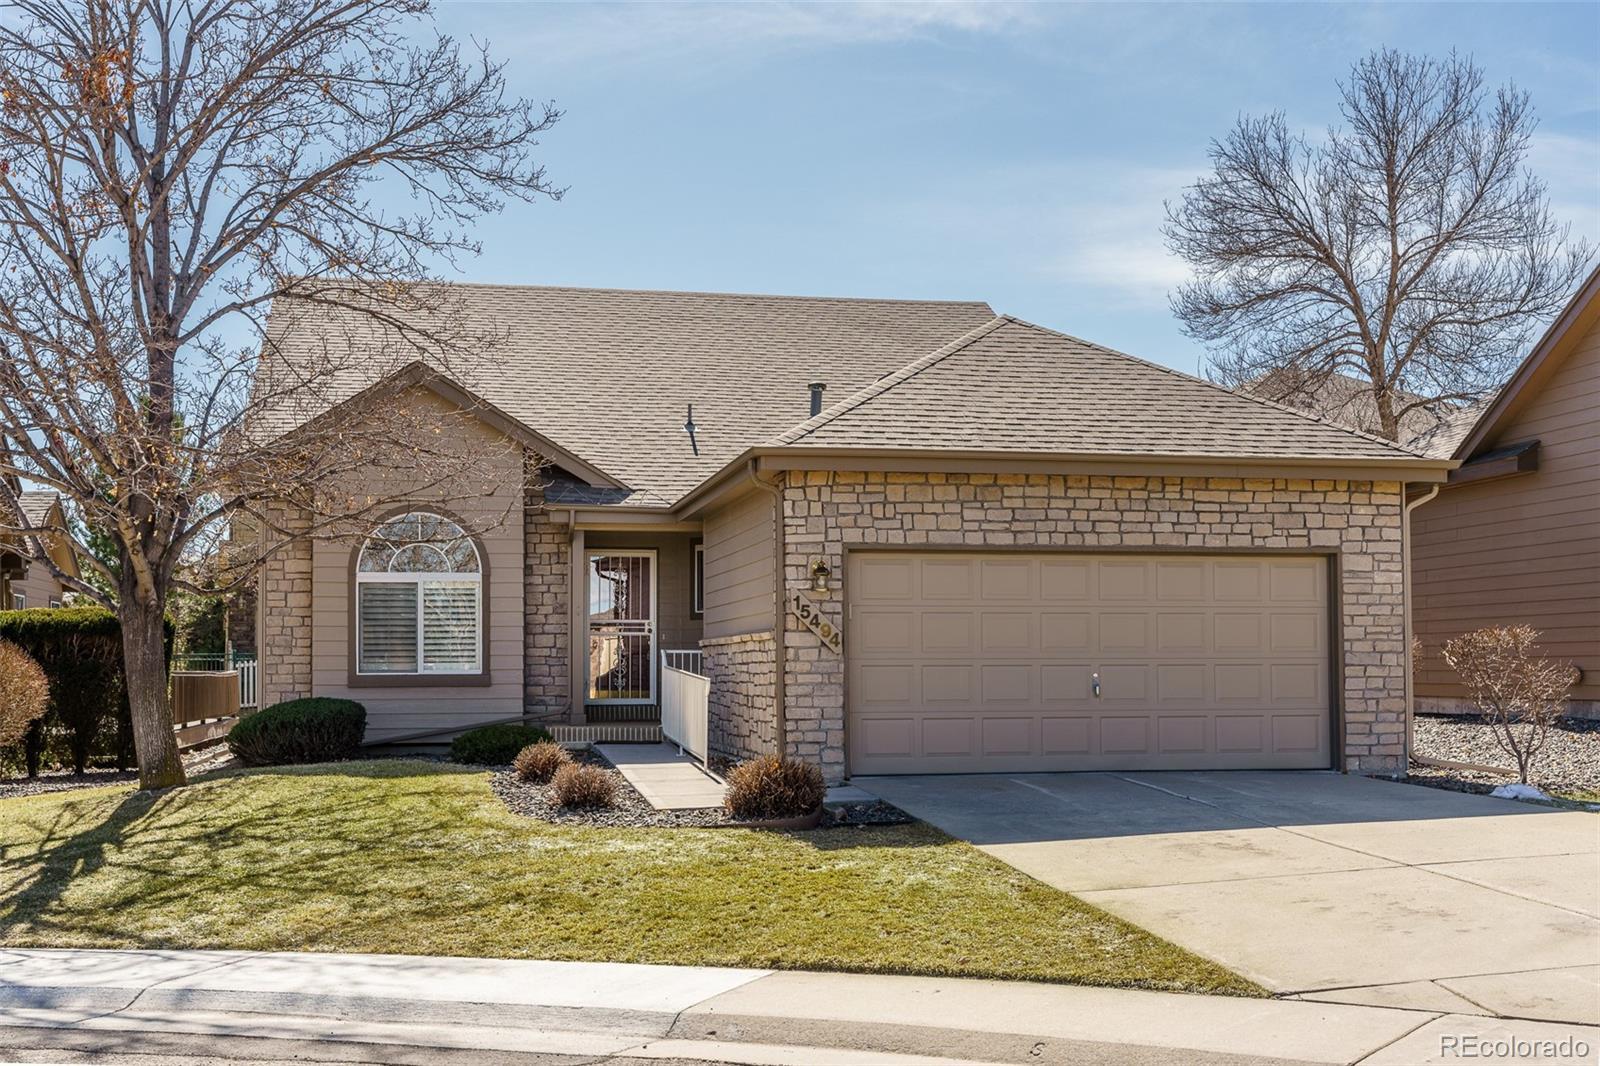 Photo one of 15494 W 67Th Ave Arvada CO 80007 | MLS 8019567